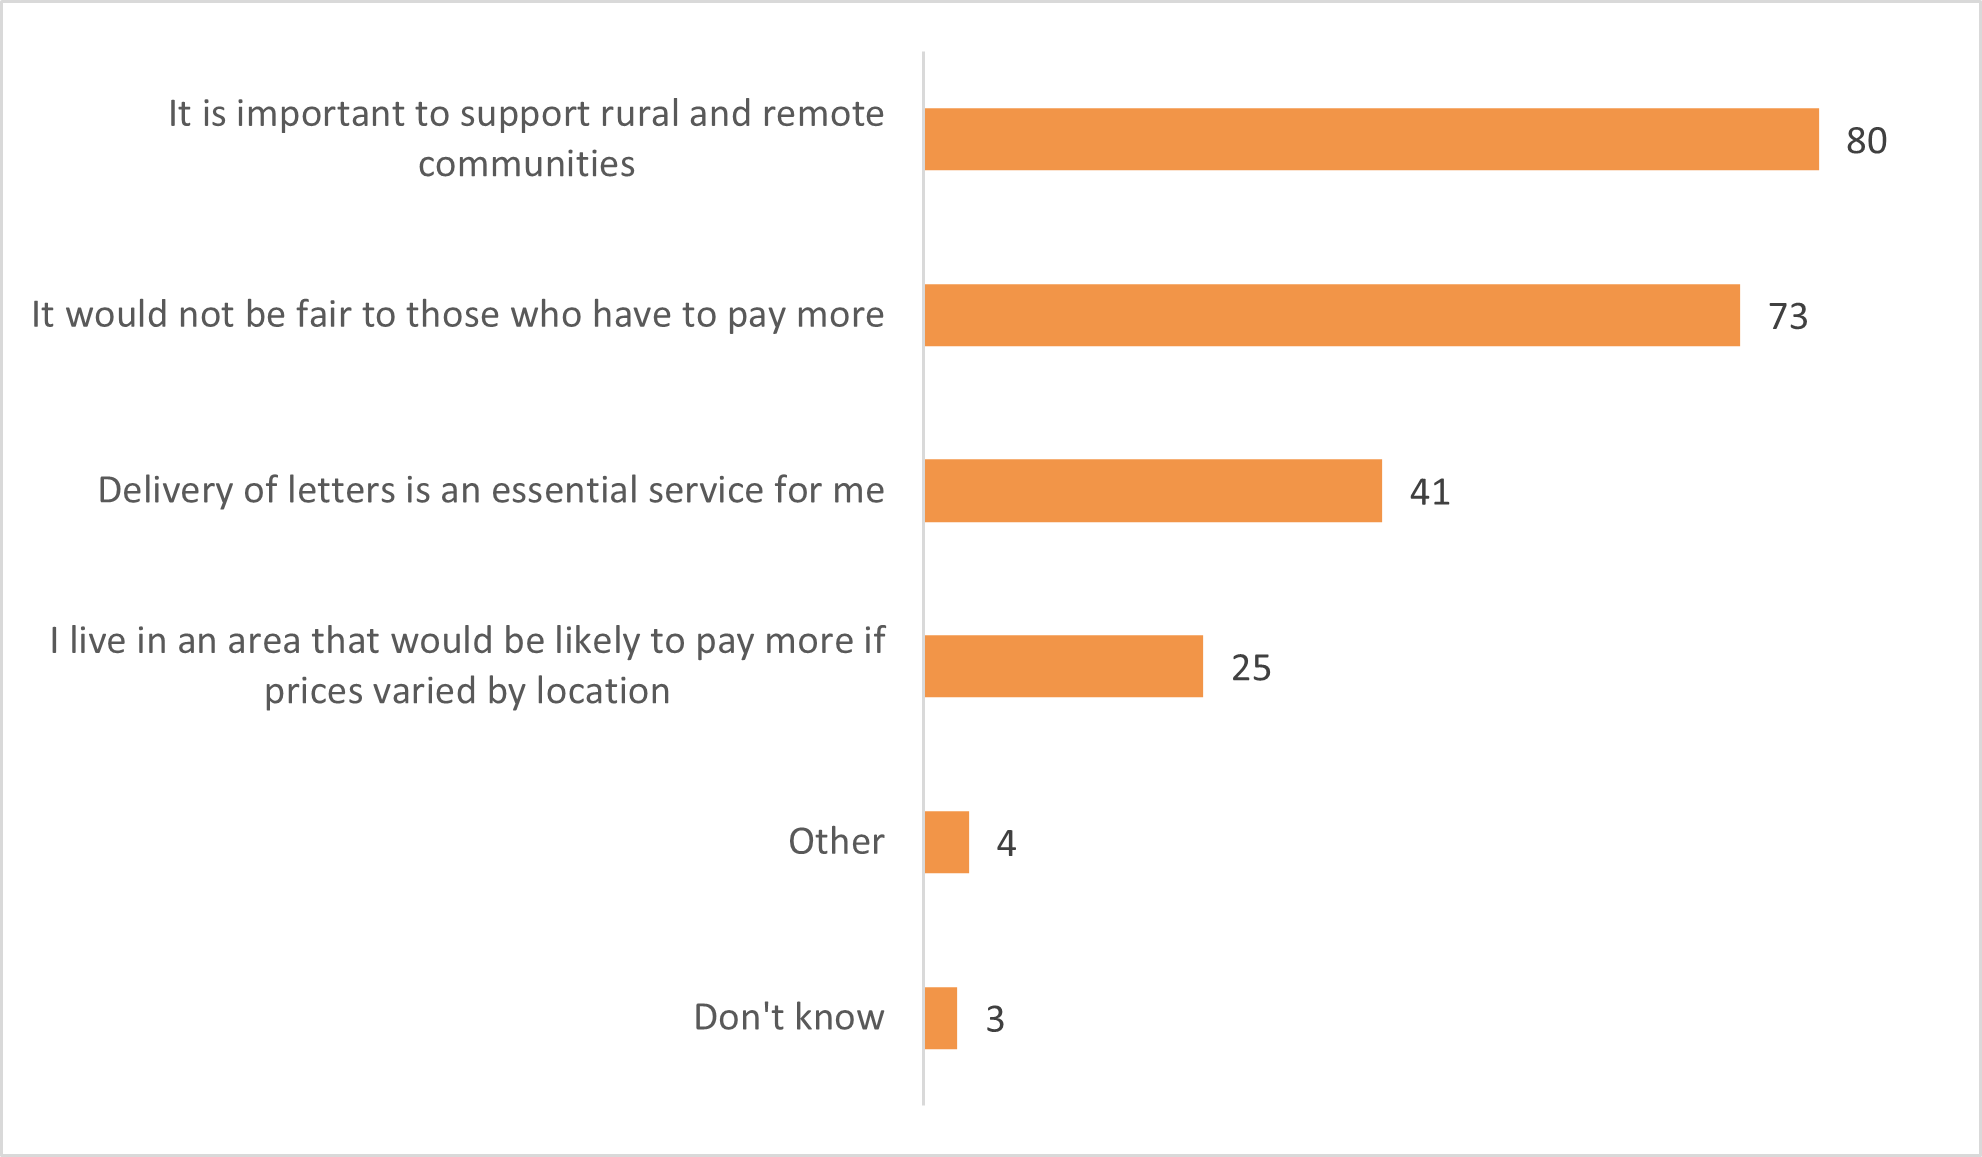 80% of consumers said it was important to support rural and remote communities, 73% said it would not be fair to those who have to pay more, 41% said delivery of letters is an essential service for them. 25% of consumers said they live in an area where it was likely they would pay more if price varied by location. 4% said other, 3% said they don't know.